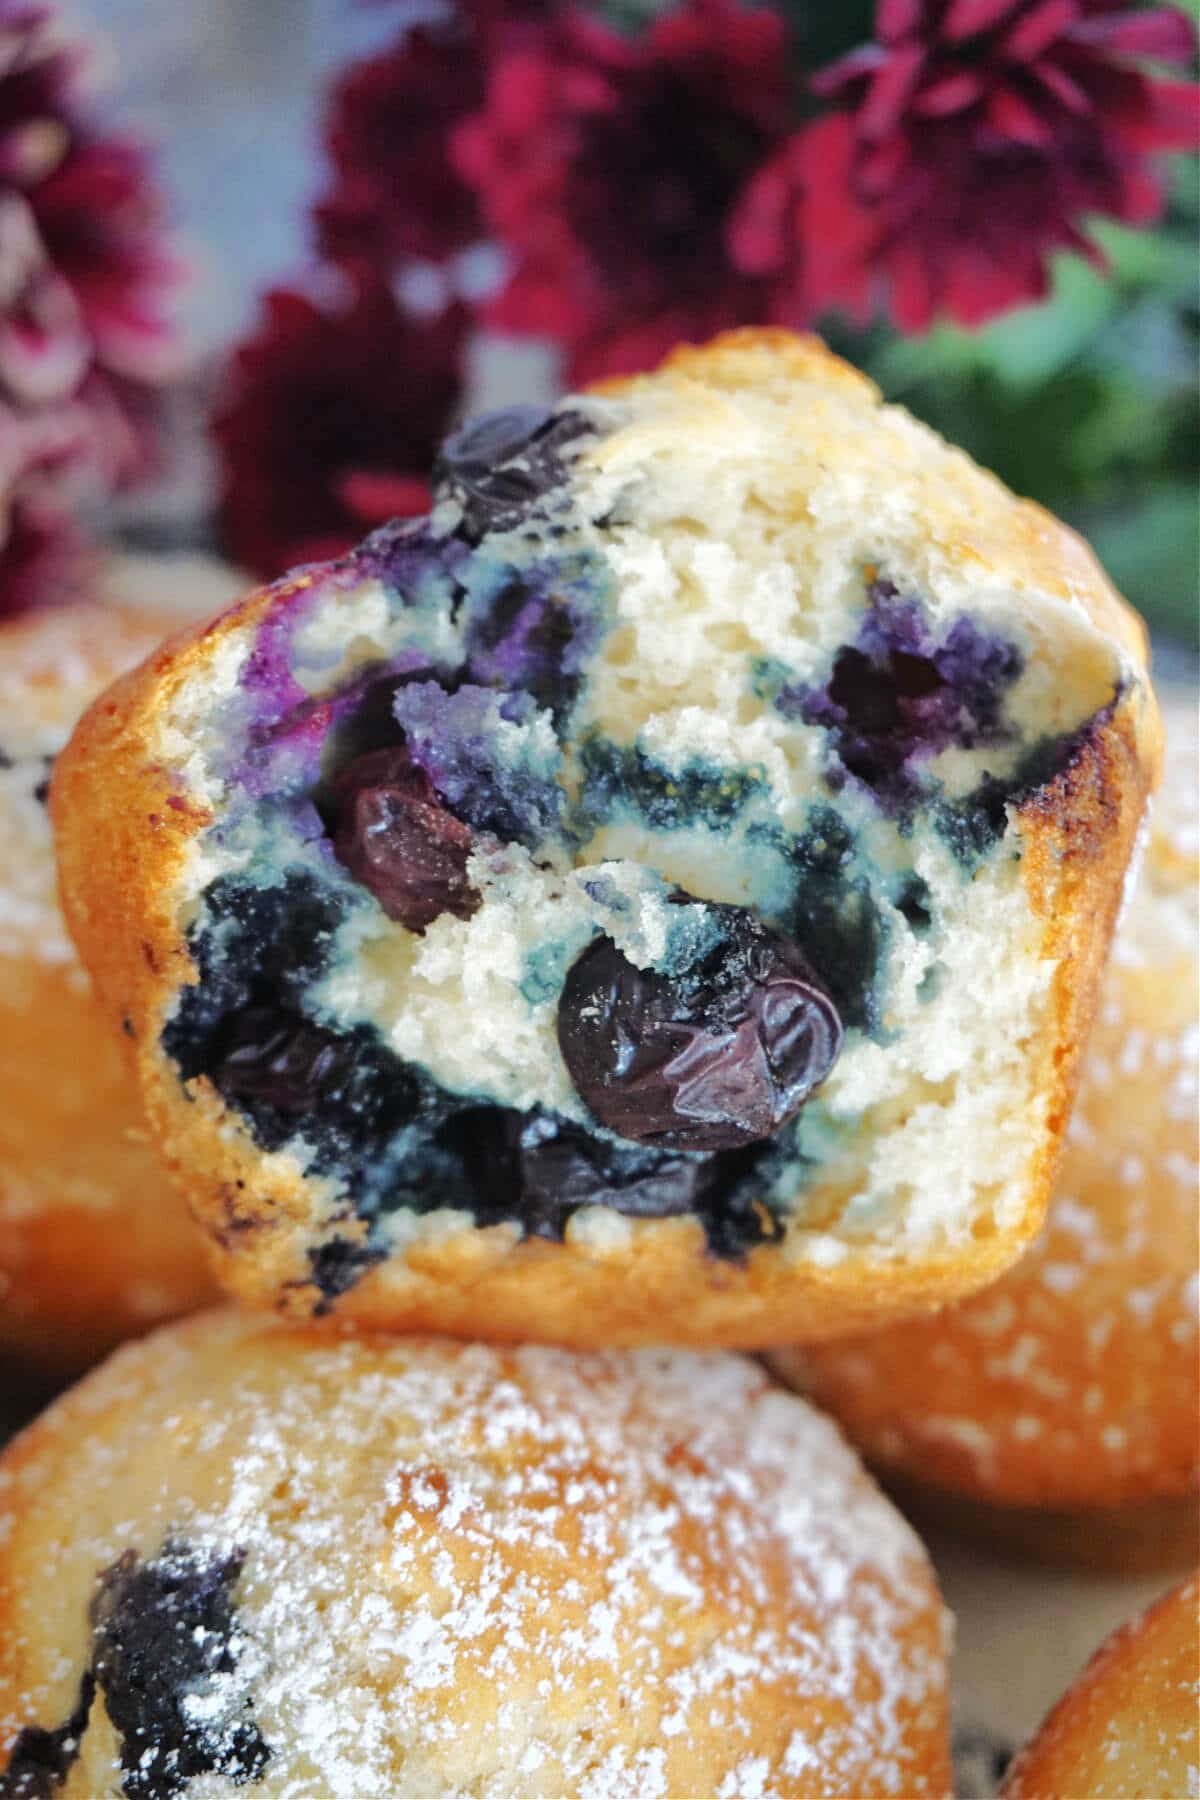 Half of a blueberry muffin on too of other muffins.